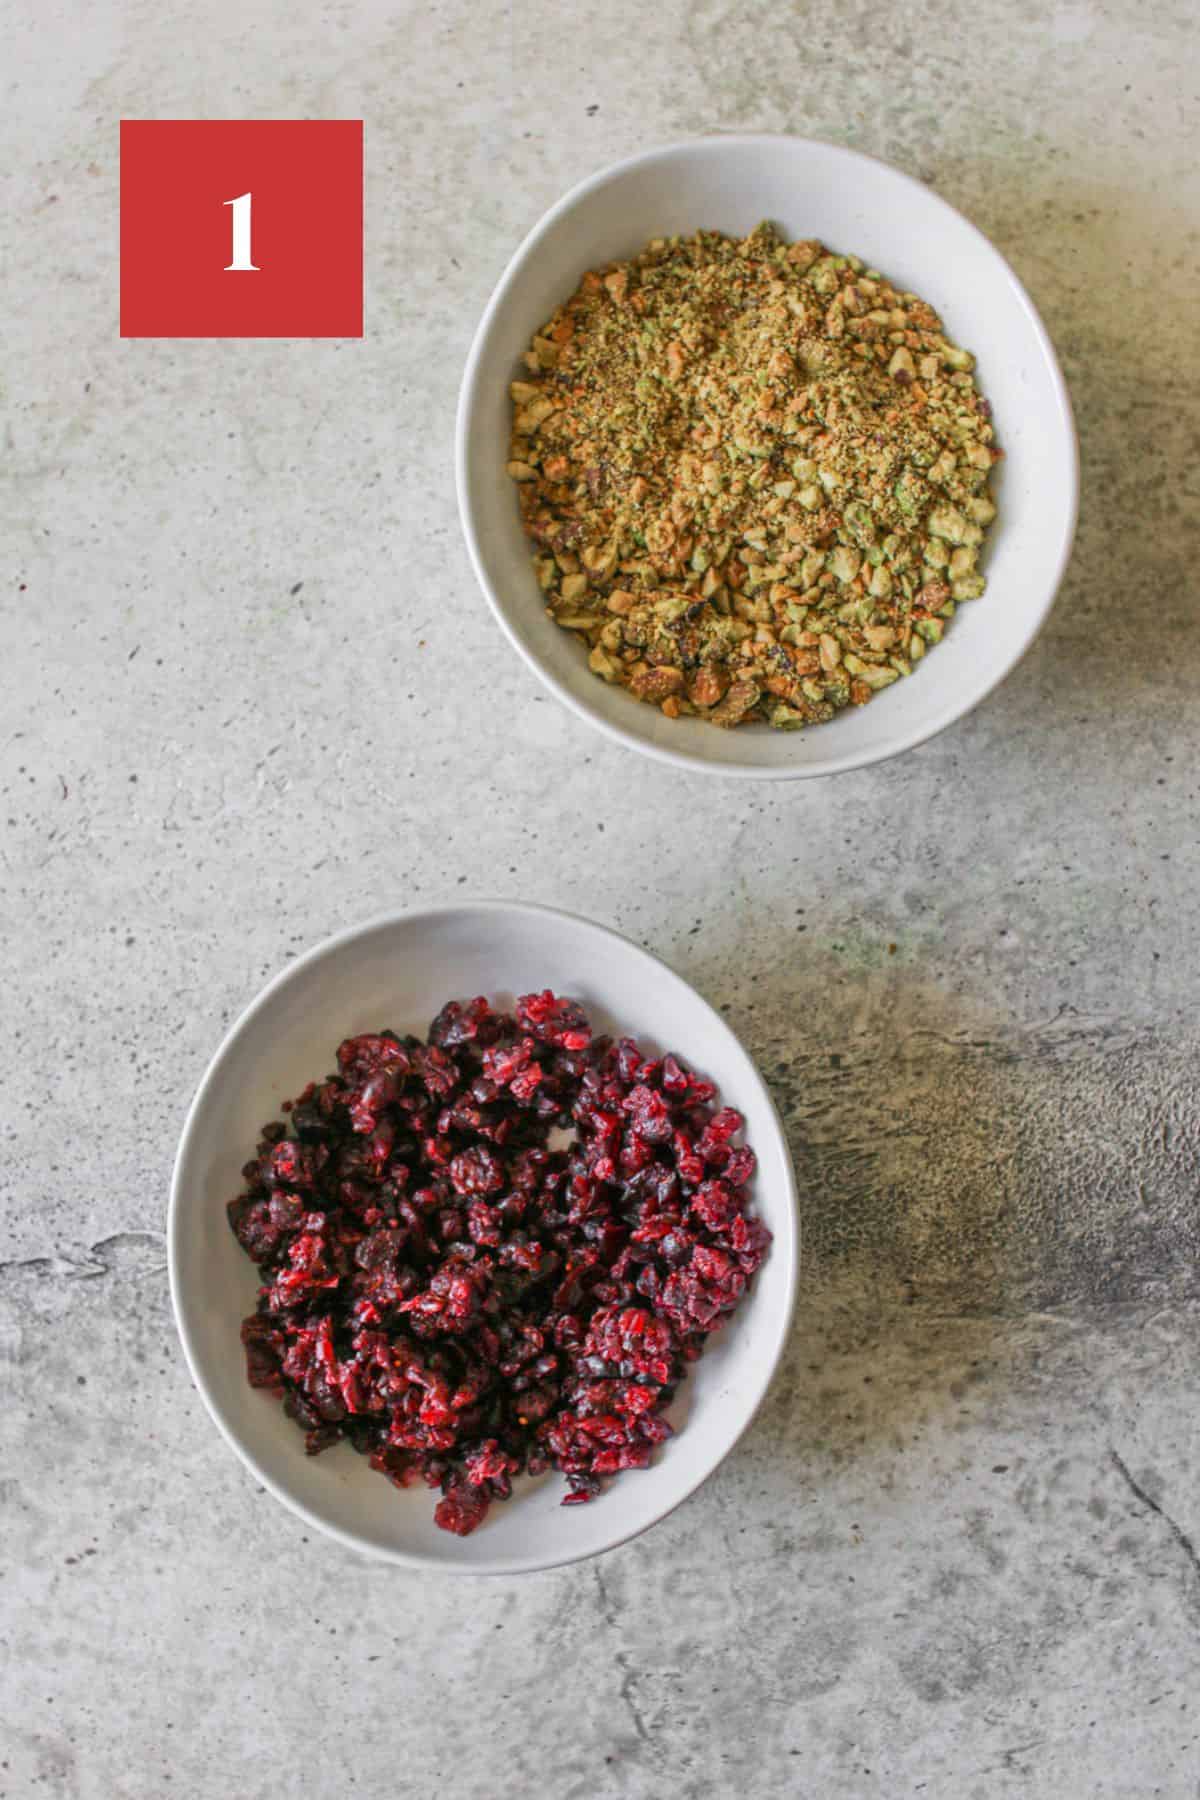 Two small white low bowls. One with crushed and finely ground pistachios and the other with diced dried cranberries. The bowls sit on a cement background. In the upper left corner is a dark red square with a white '1' in the center.